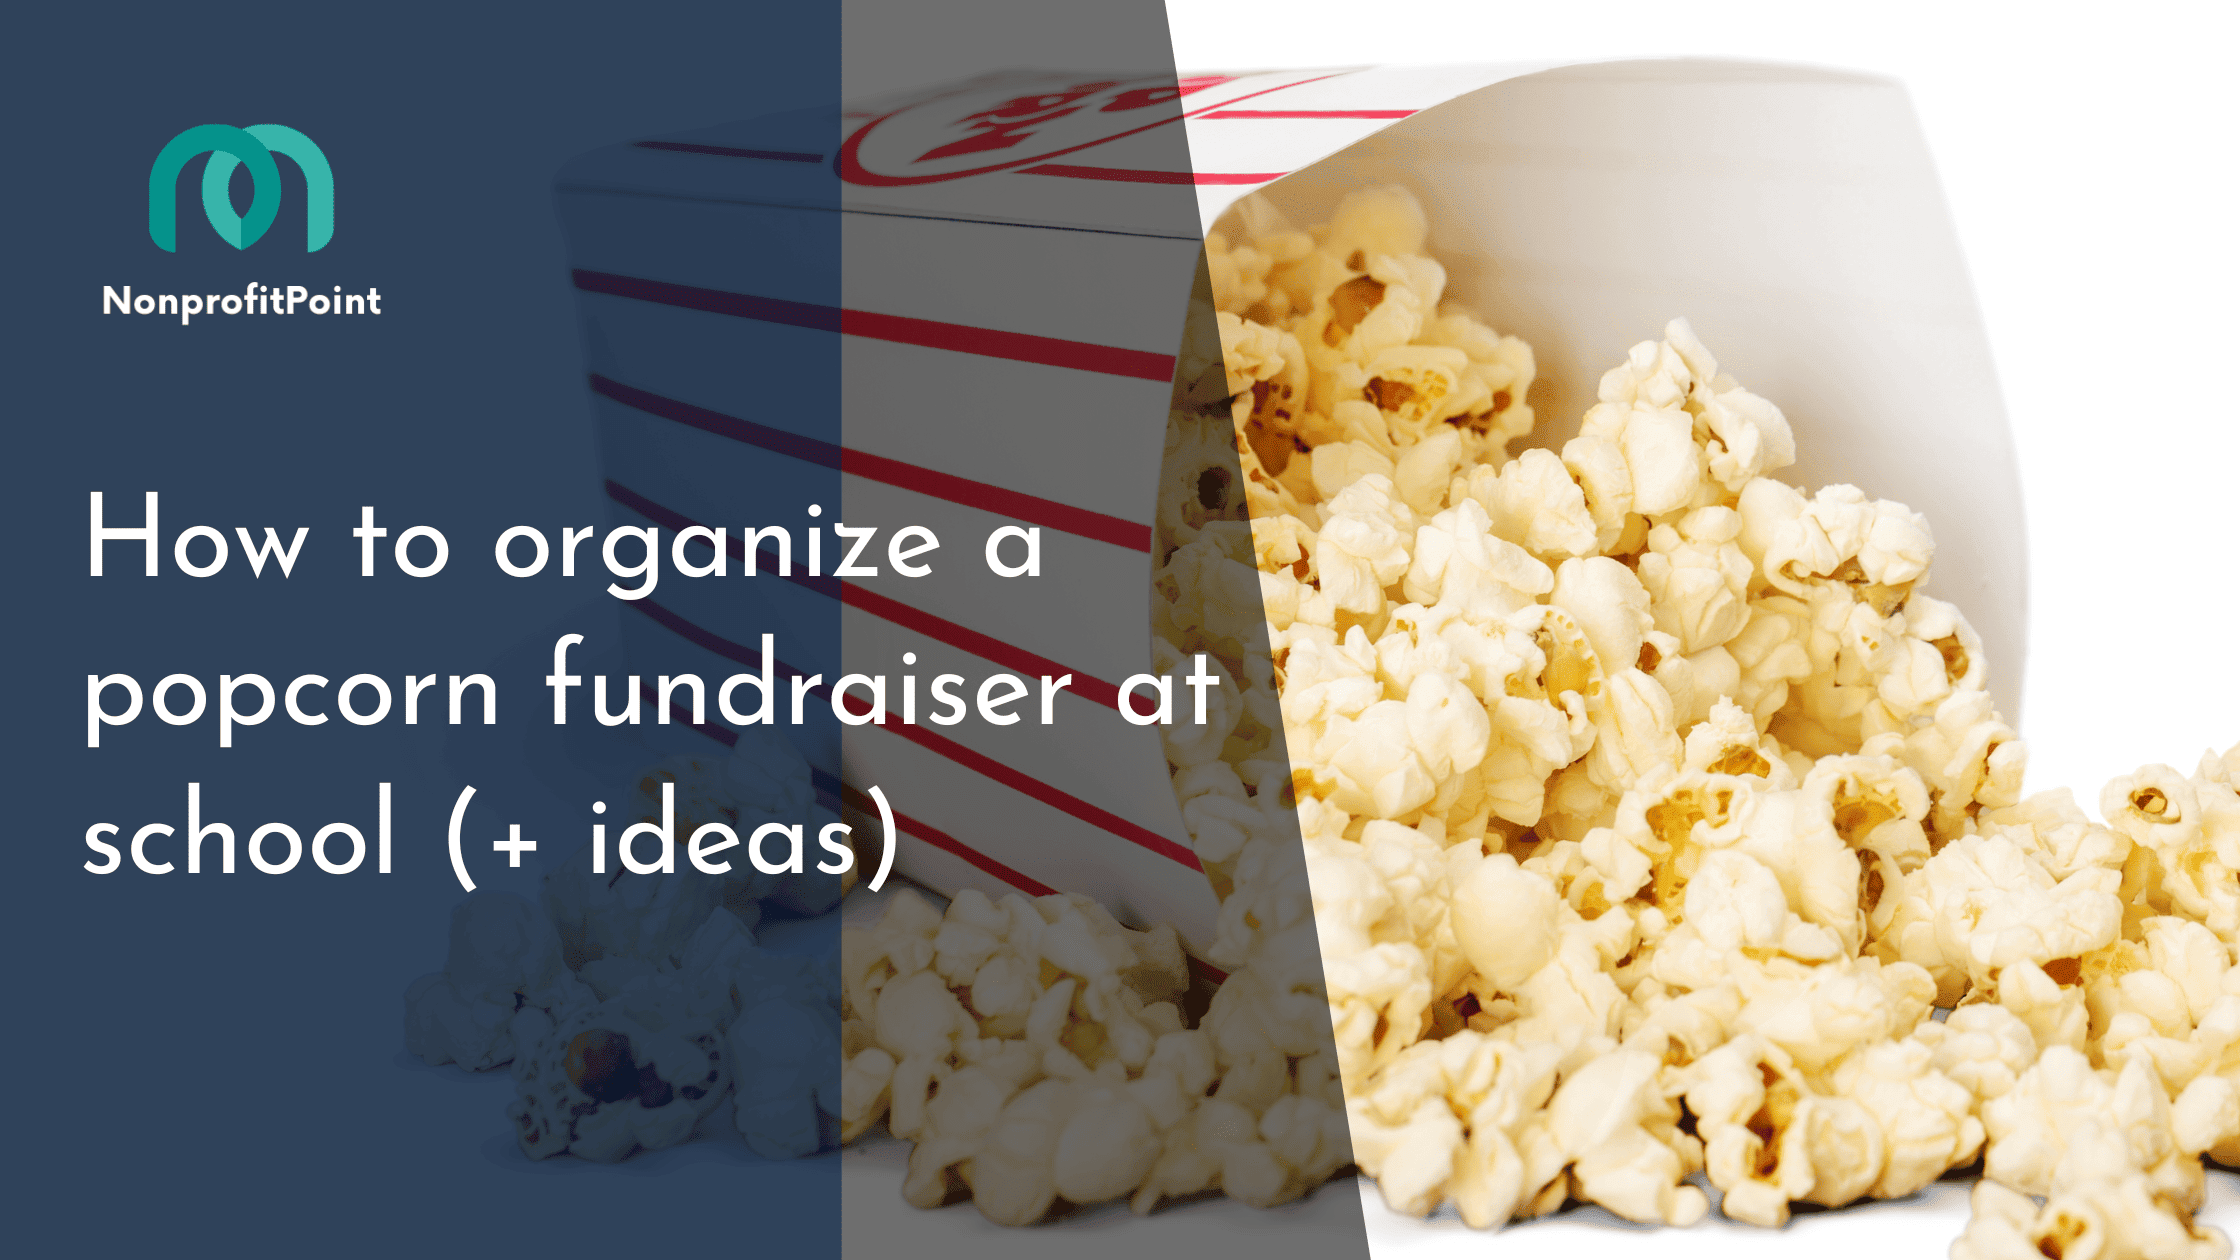 How to organize a popcorn fundraiser at school (+ ideas)